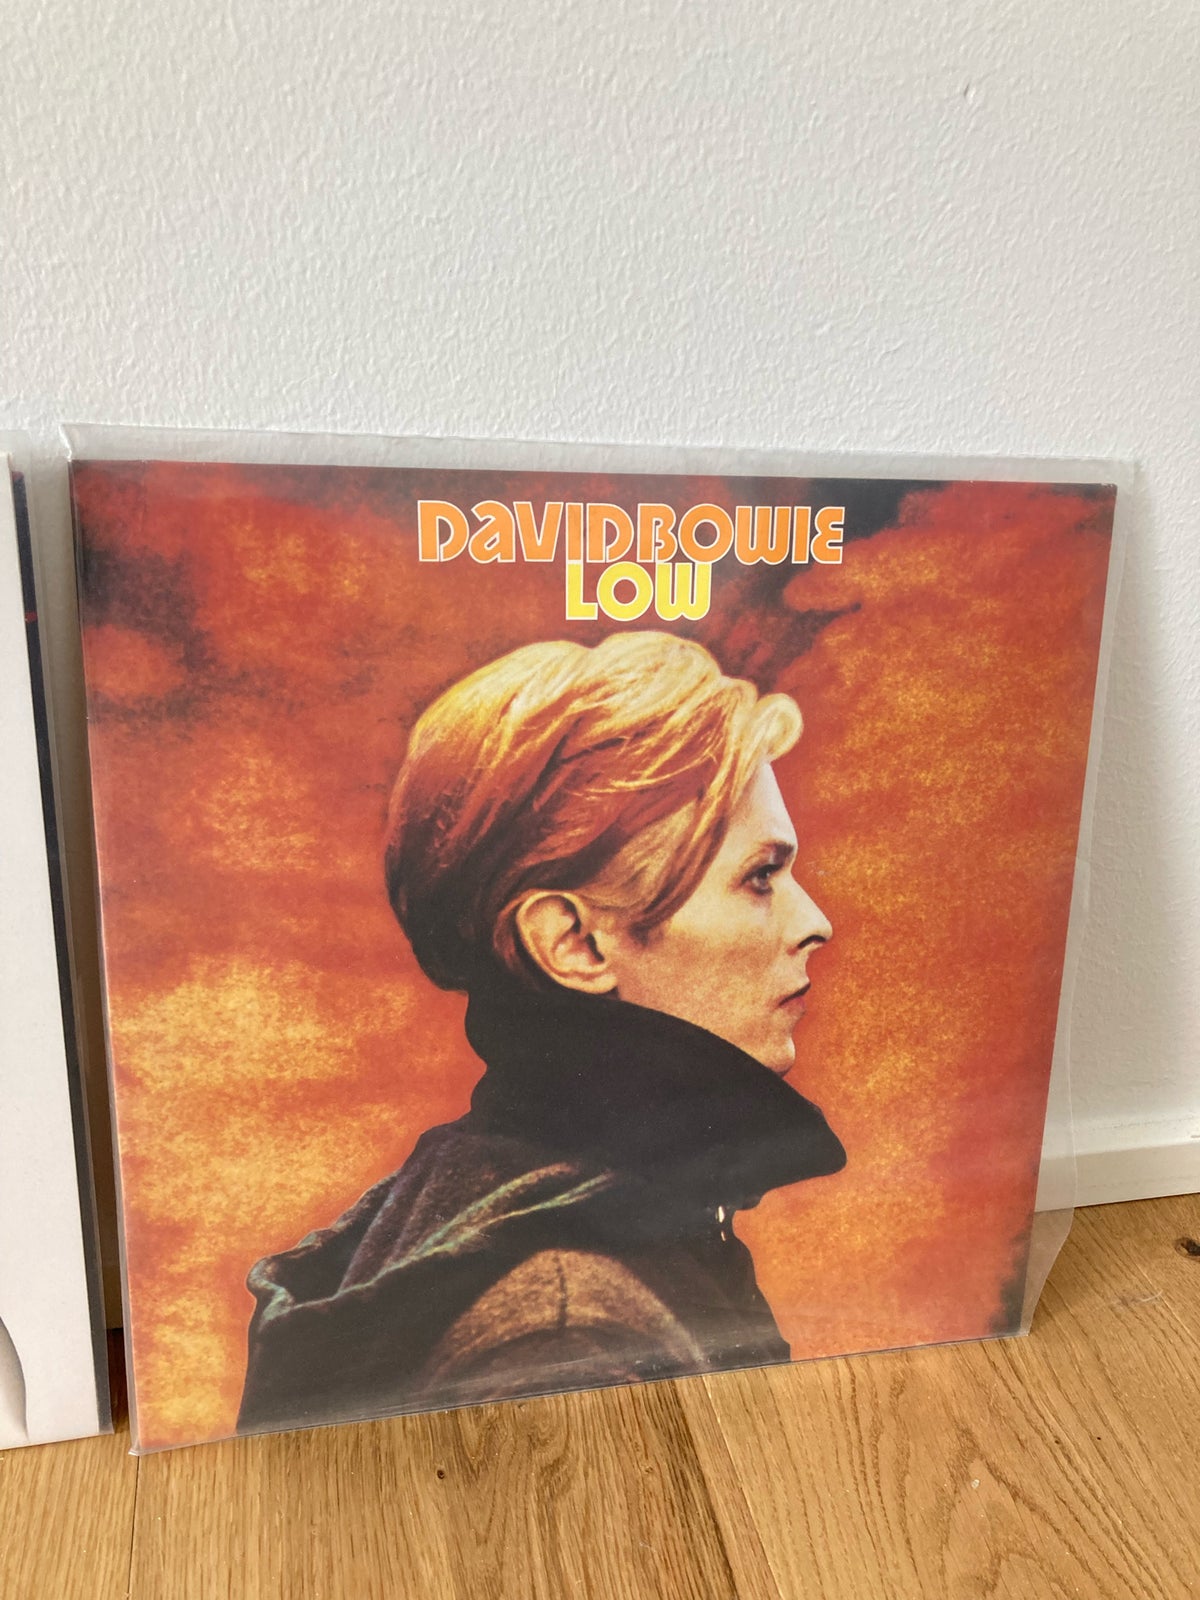 LP, David Bowie, The rise and fall of Ziggy